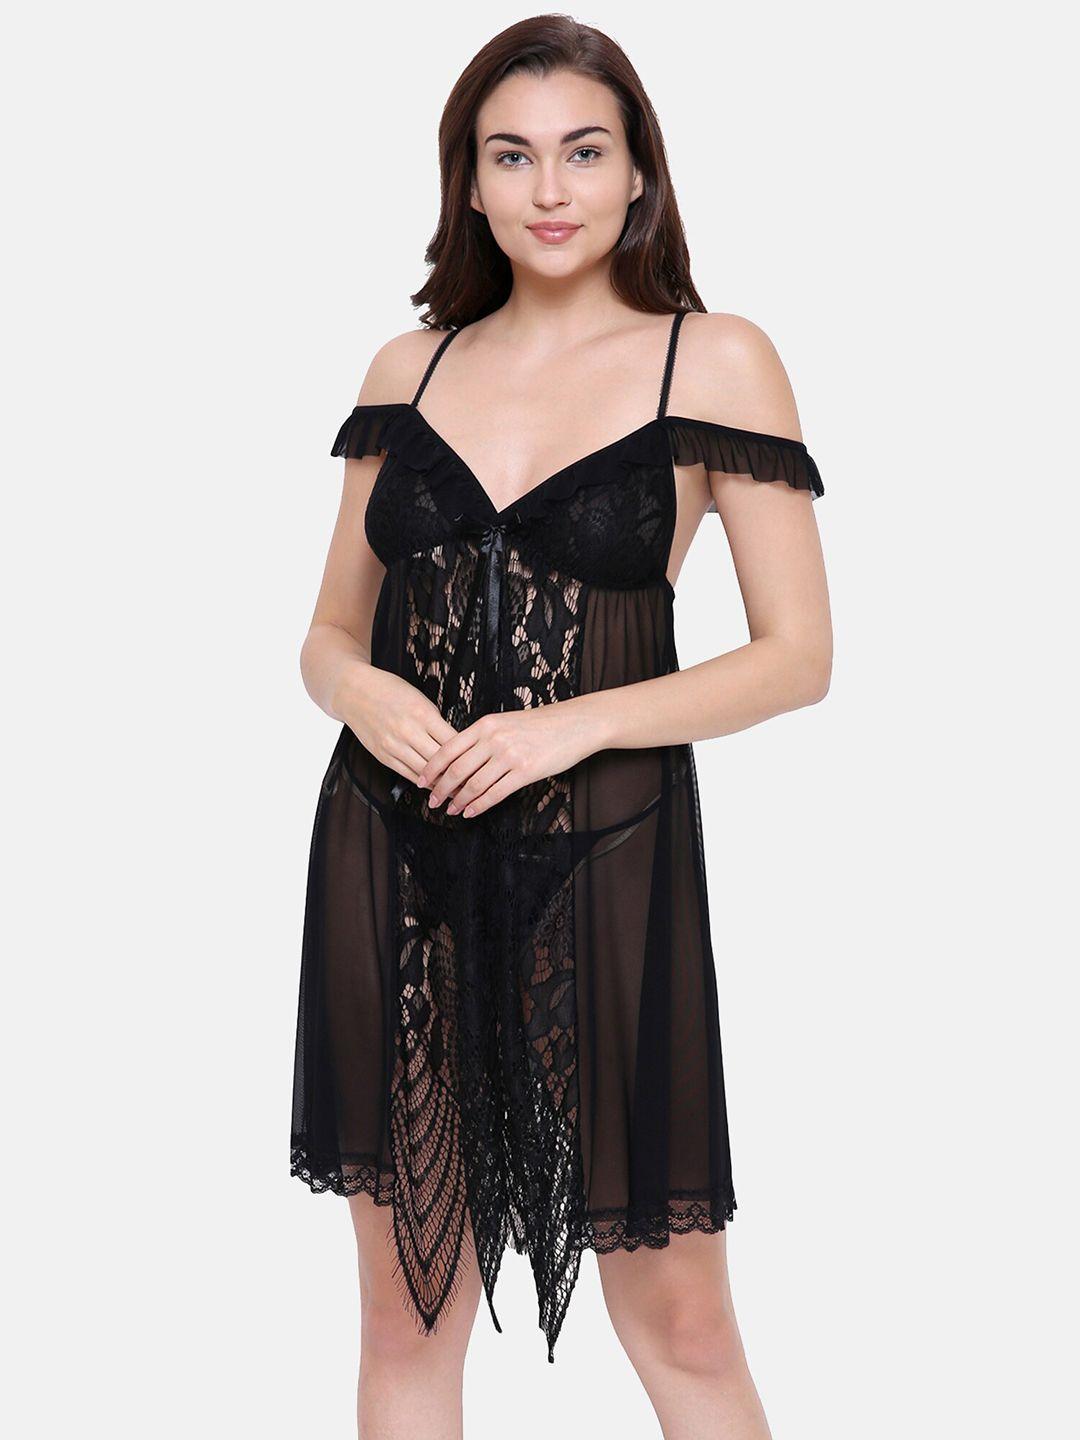 fashionrack women black net and lace baby doll with briefs